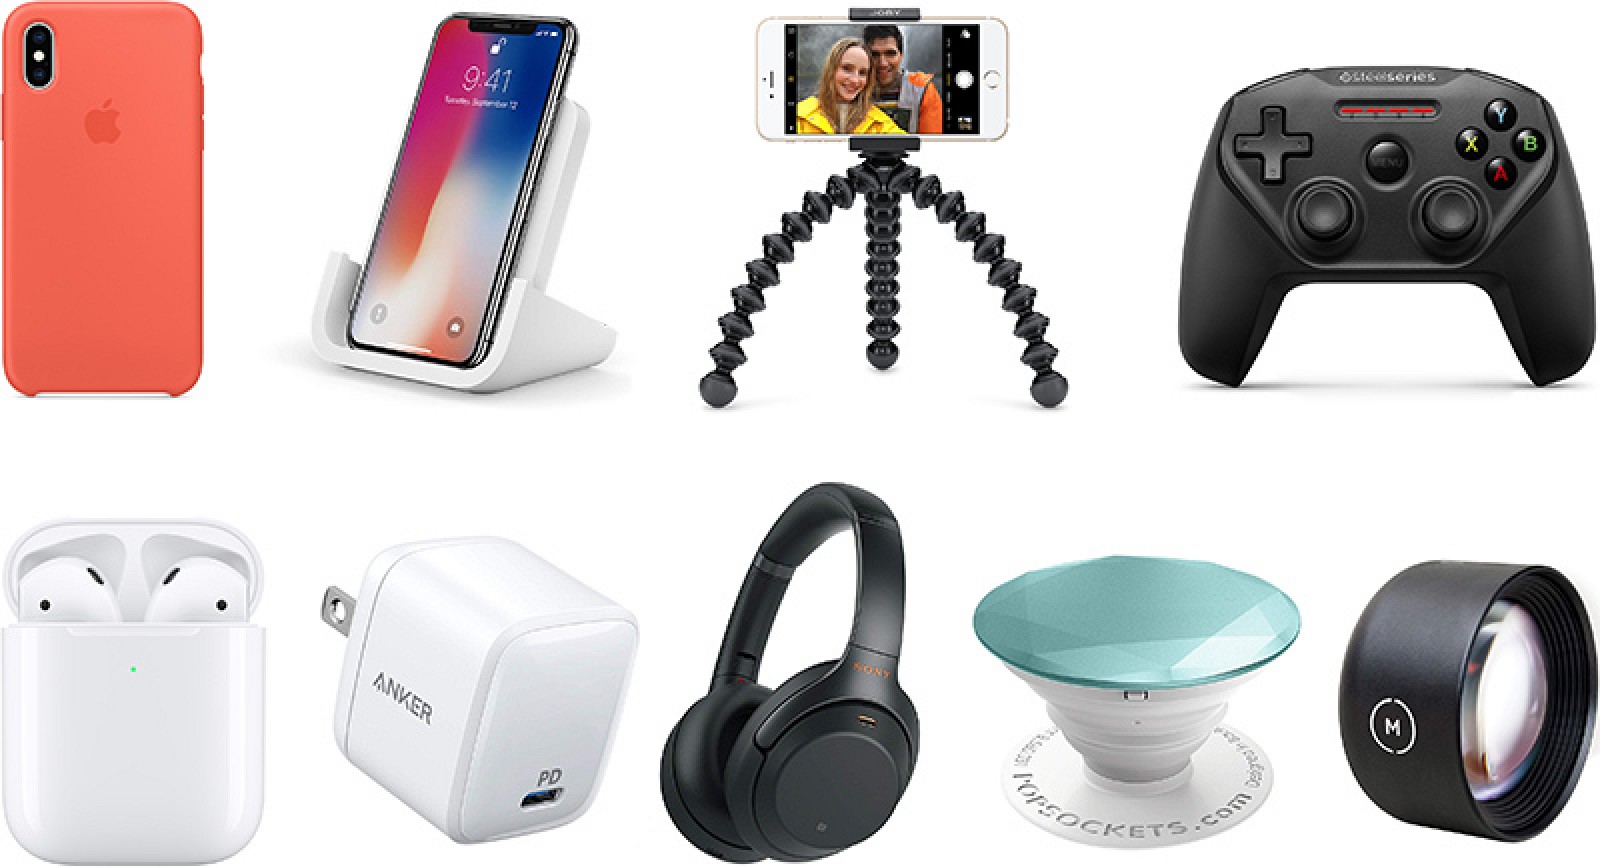 Best iPhone Accessories: Our Favorite Picks for 2019 - MacRumors